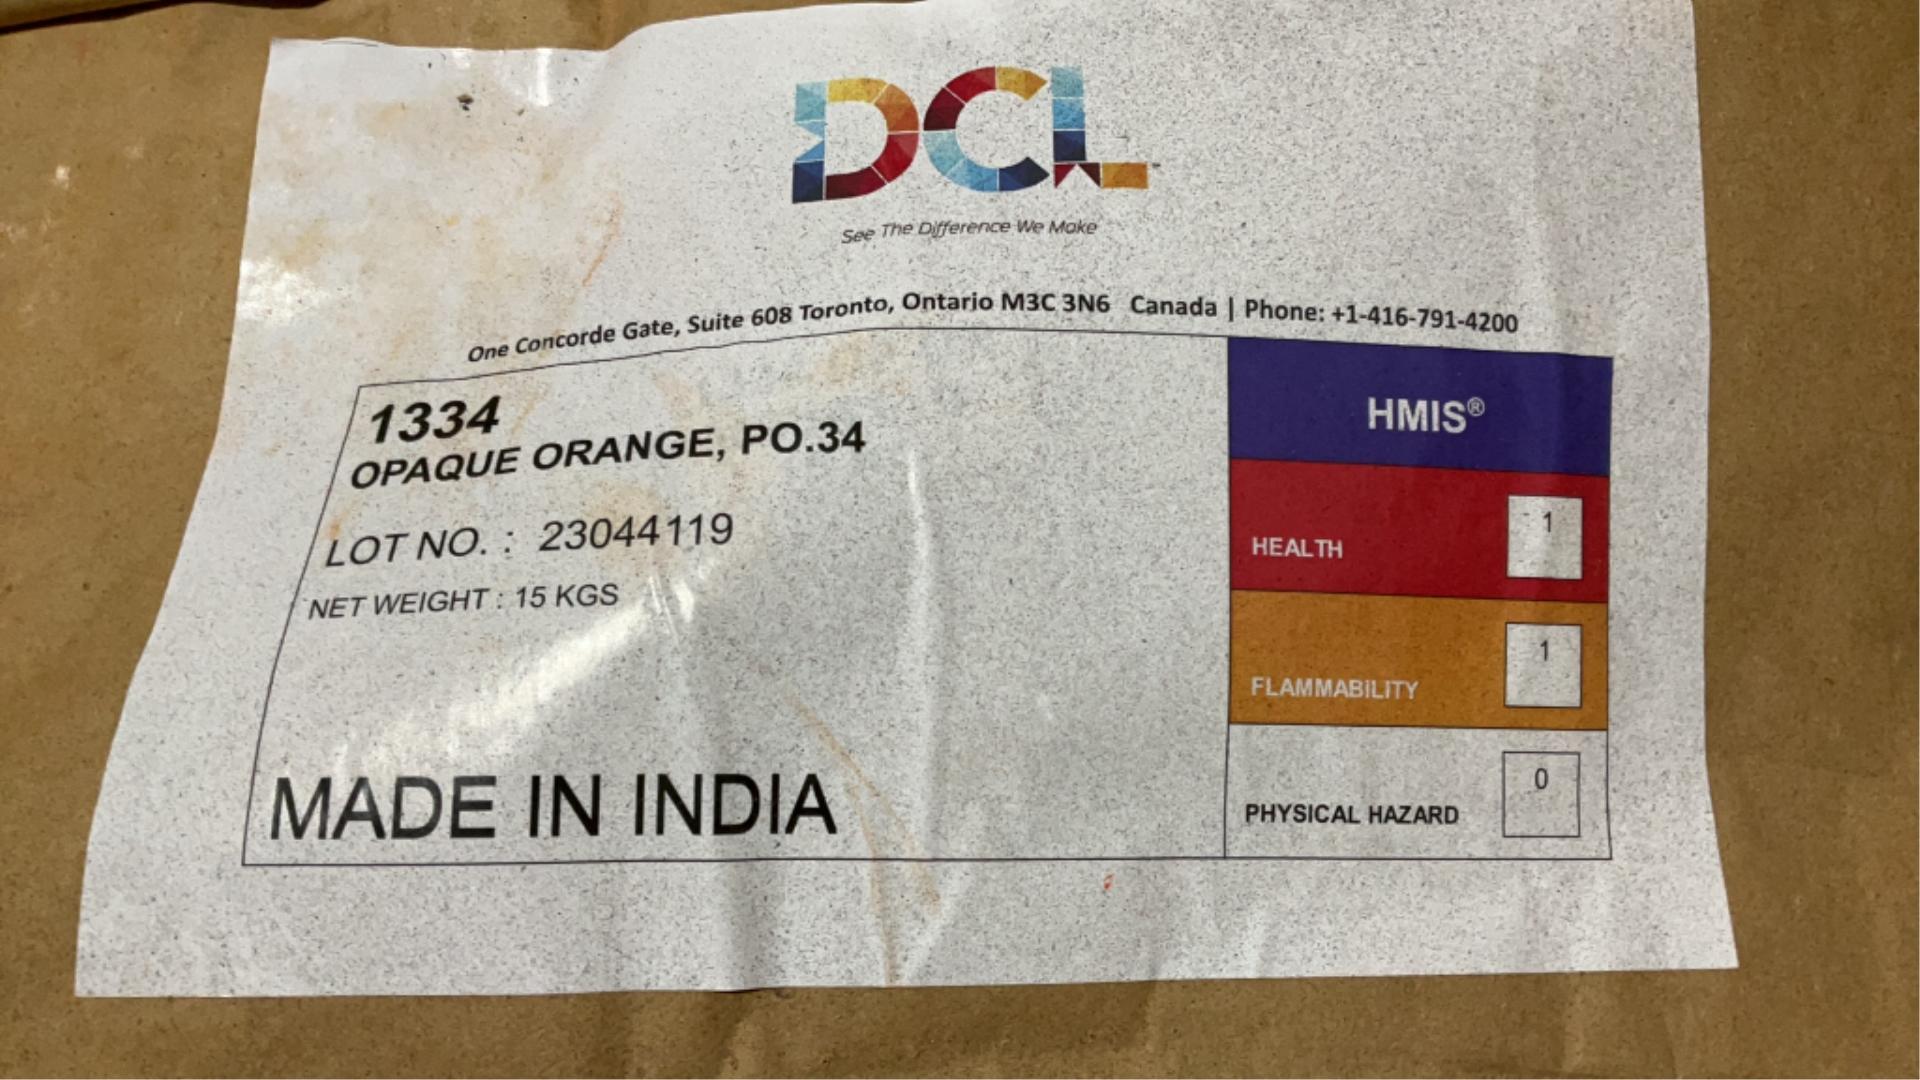 (10) DCL 33lb Bags of Diarylide Orange Pigment